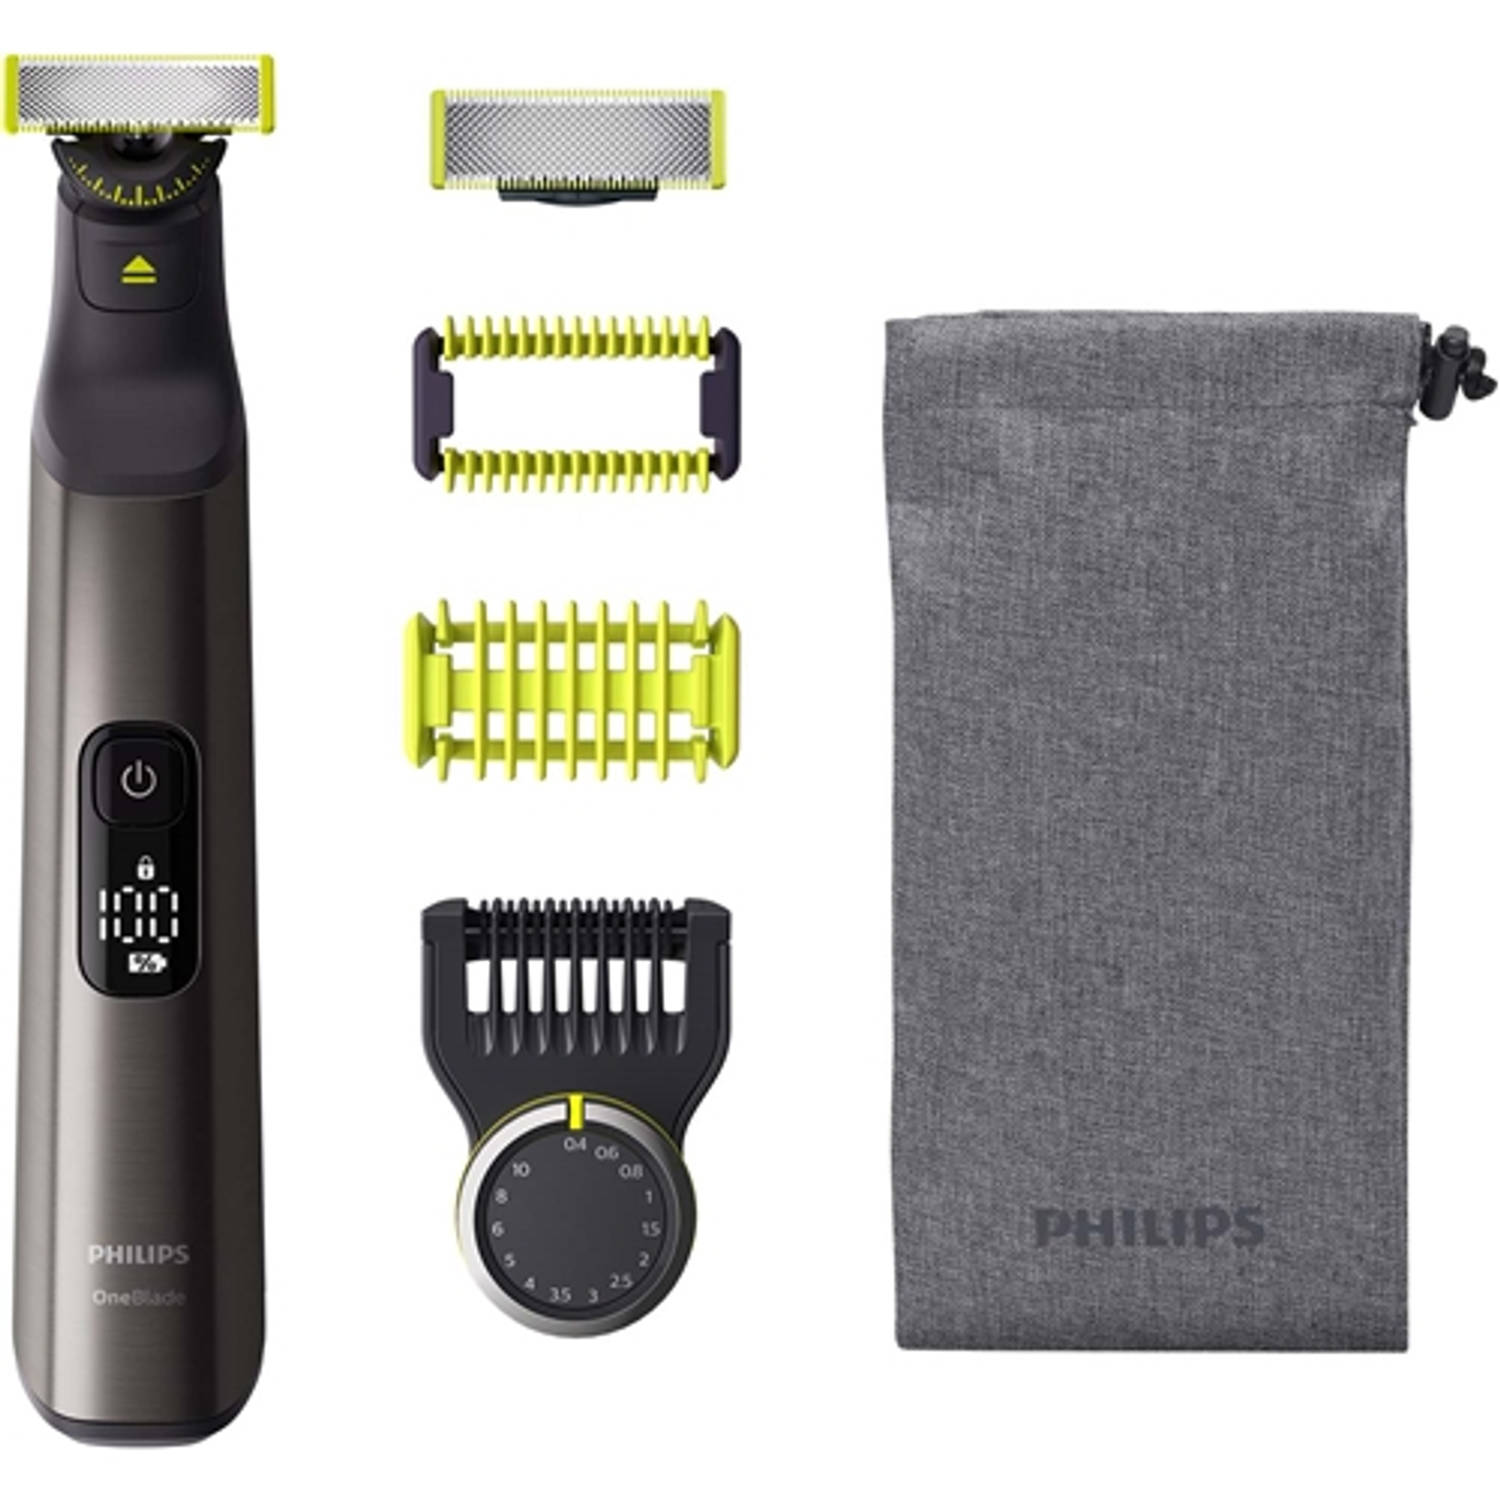 Philips trimmer QP6551/15